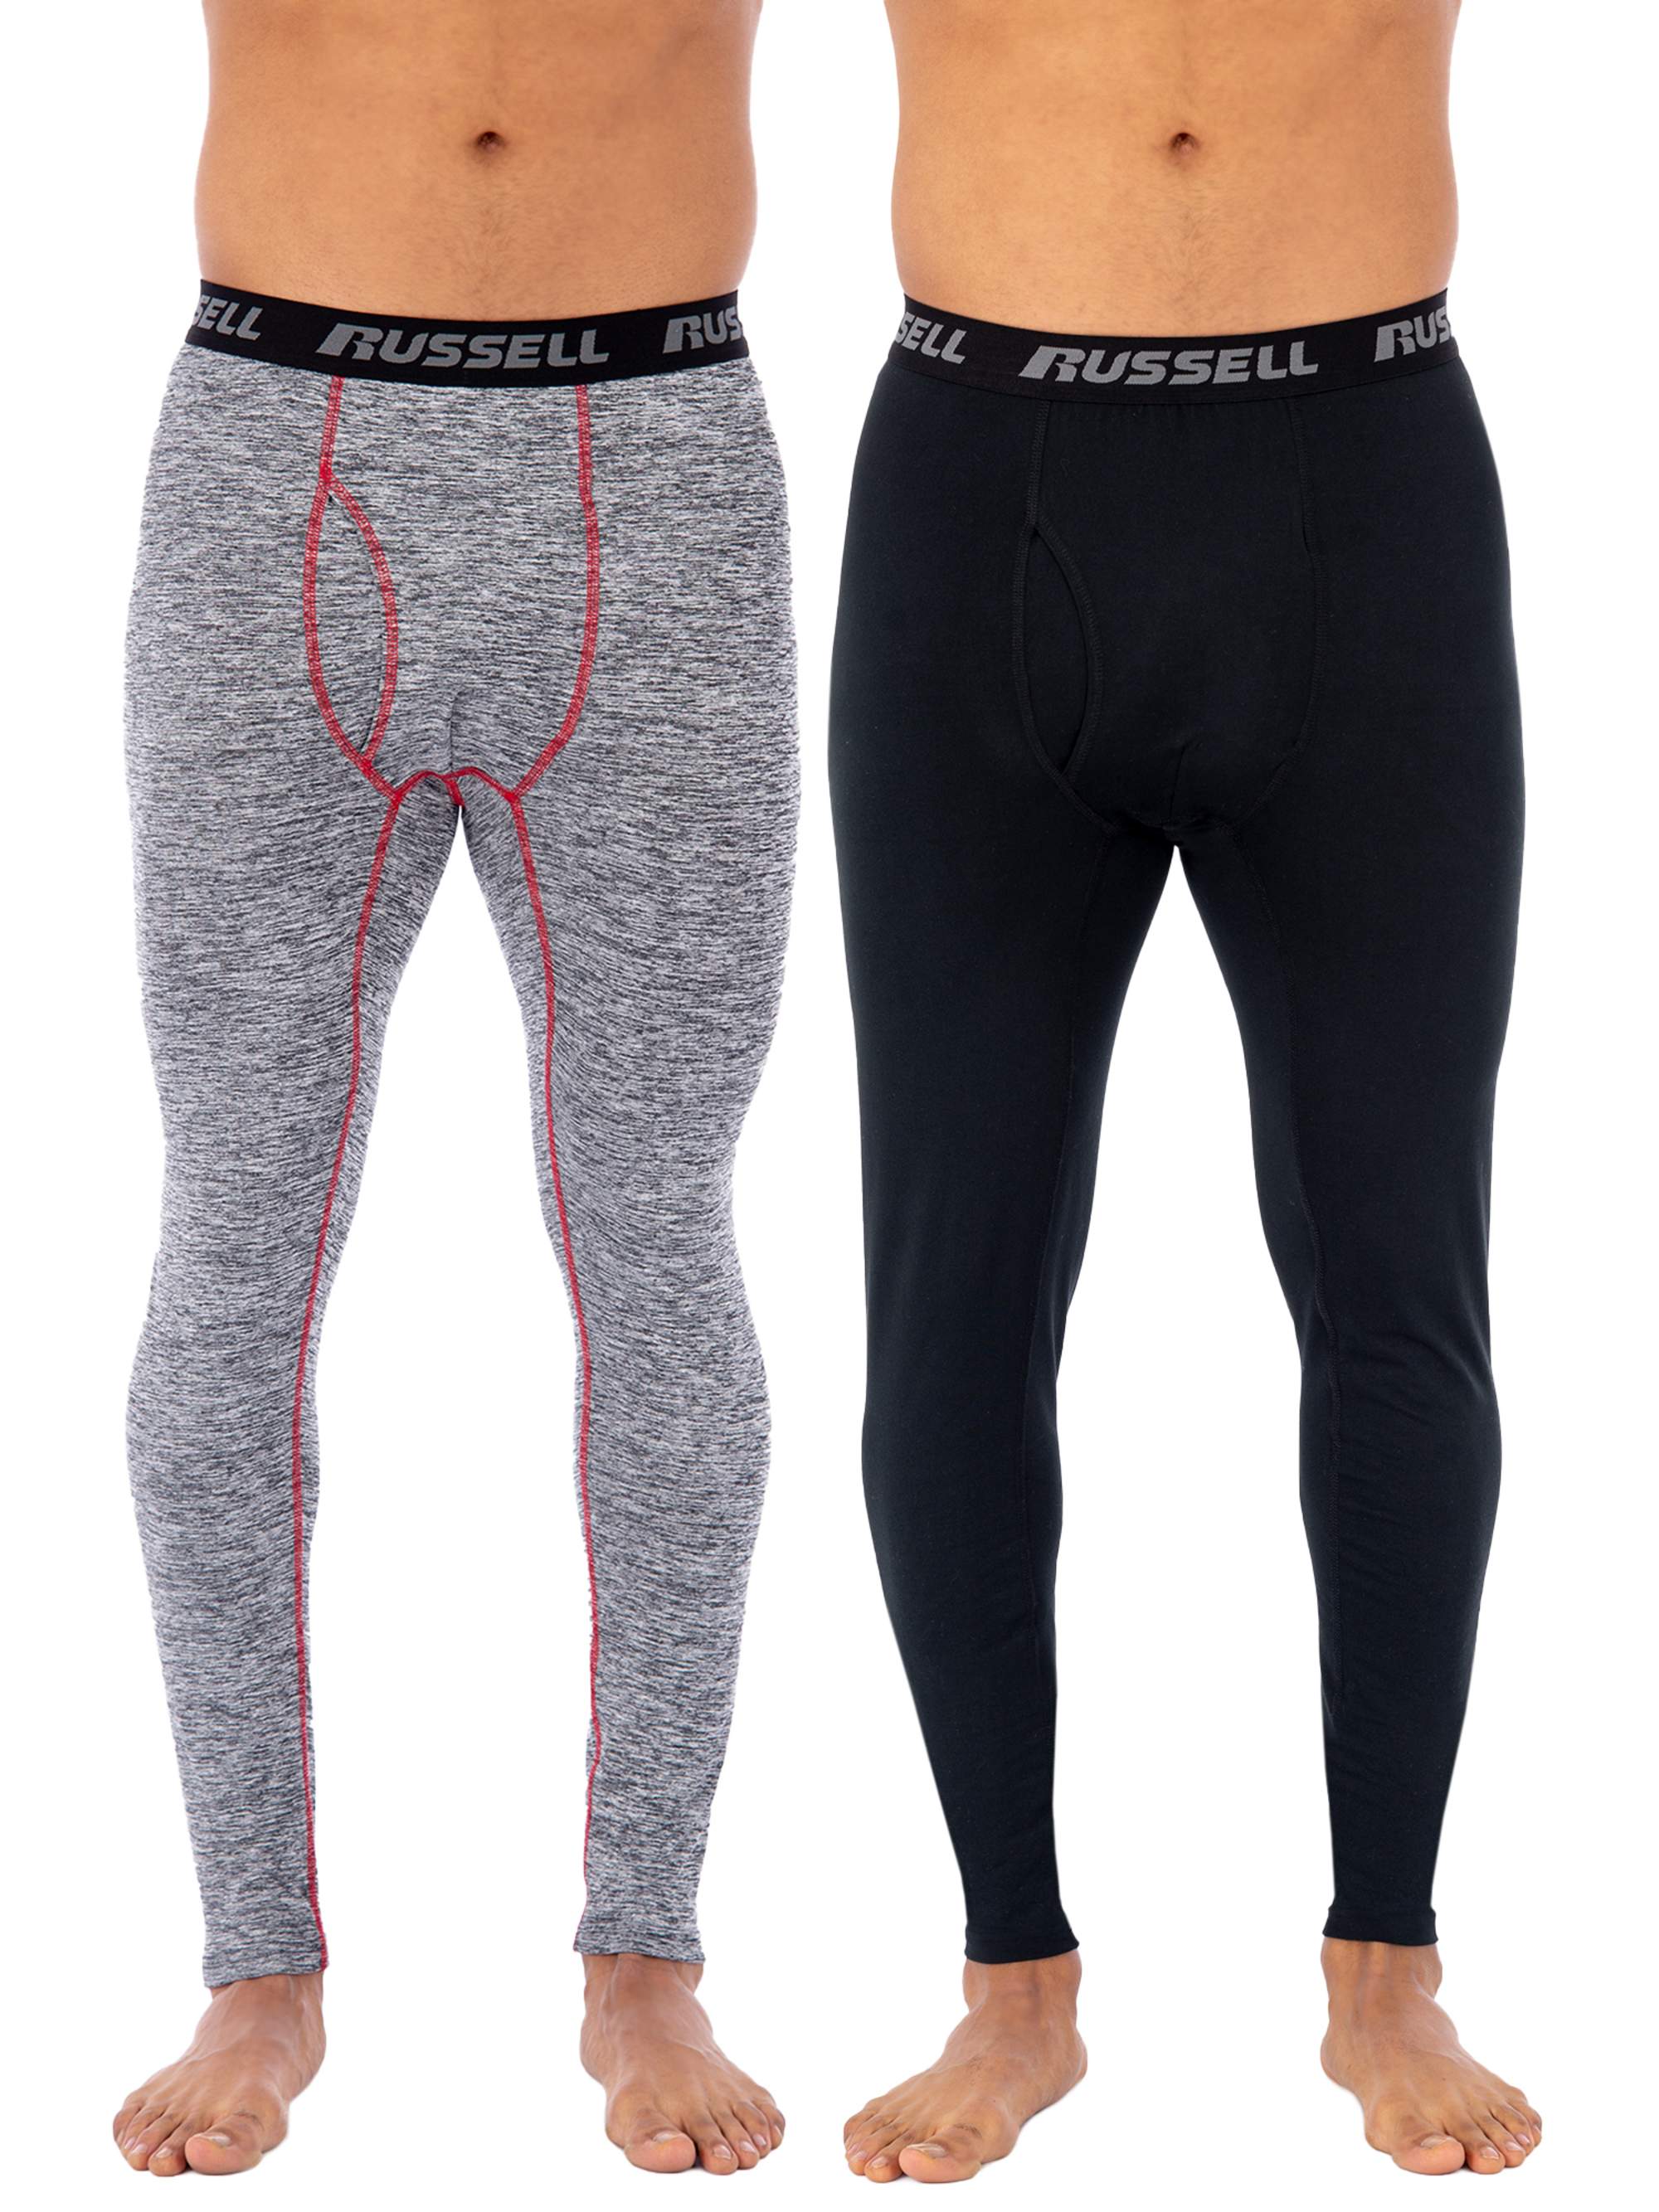 Russell 2-Pack Adult Mens & Big Mens L2 Active Performance Base Layer Thermal Pant, Sizes M-5XL - image 1 of 6